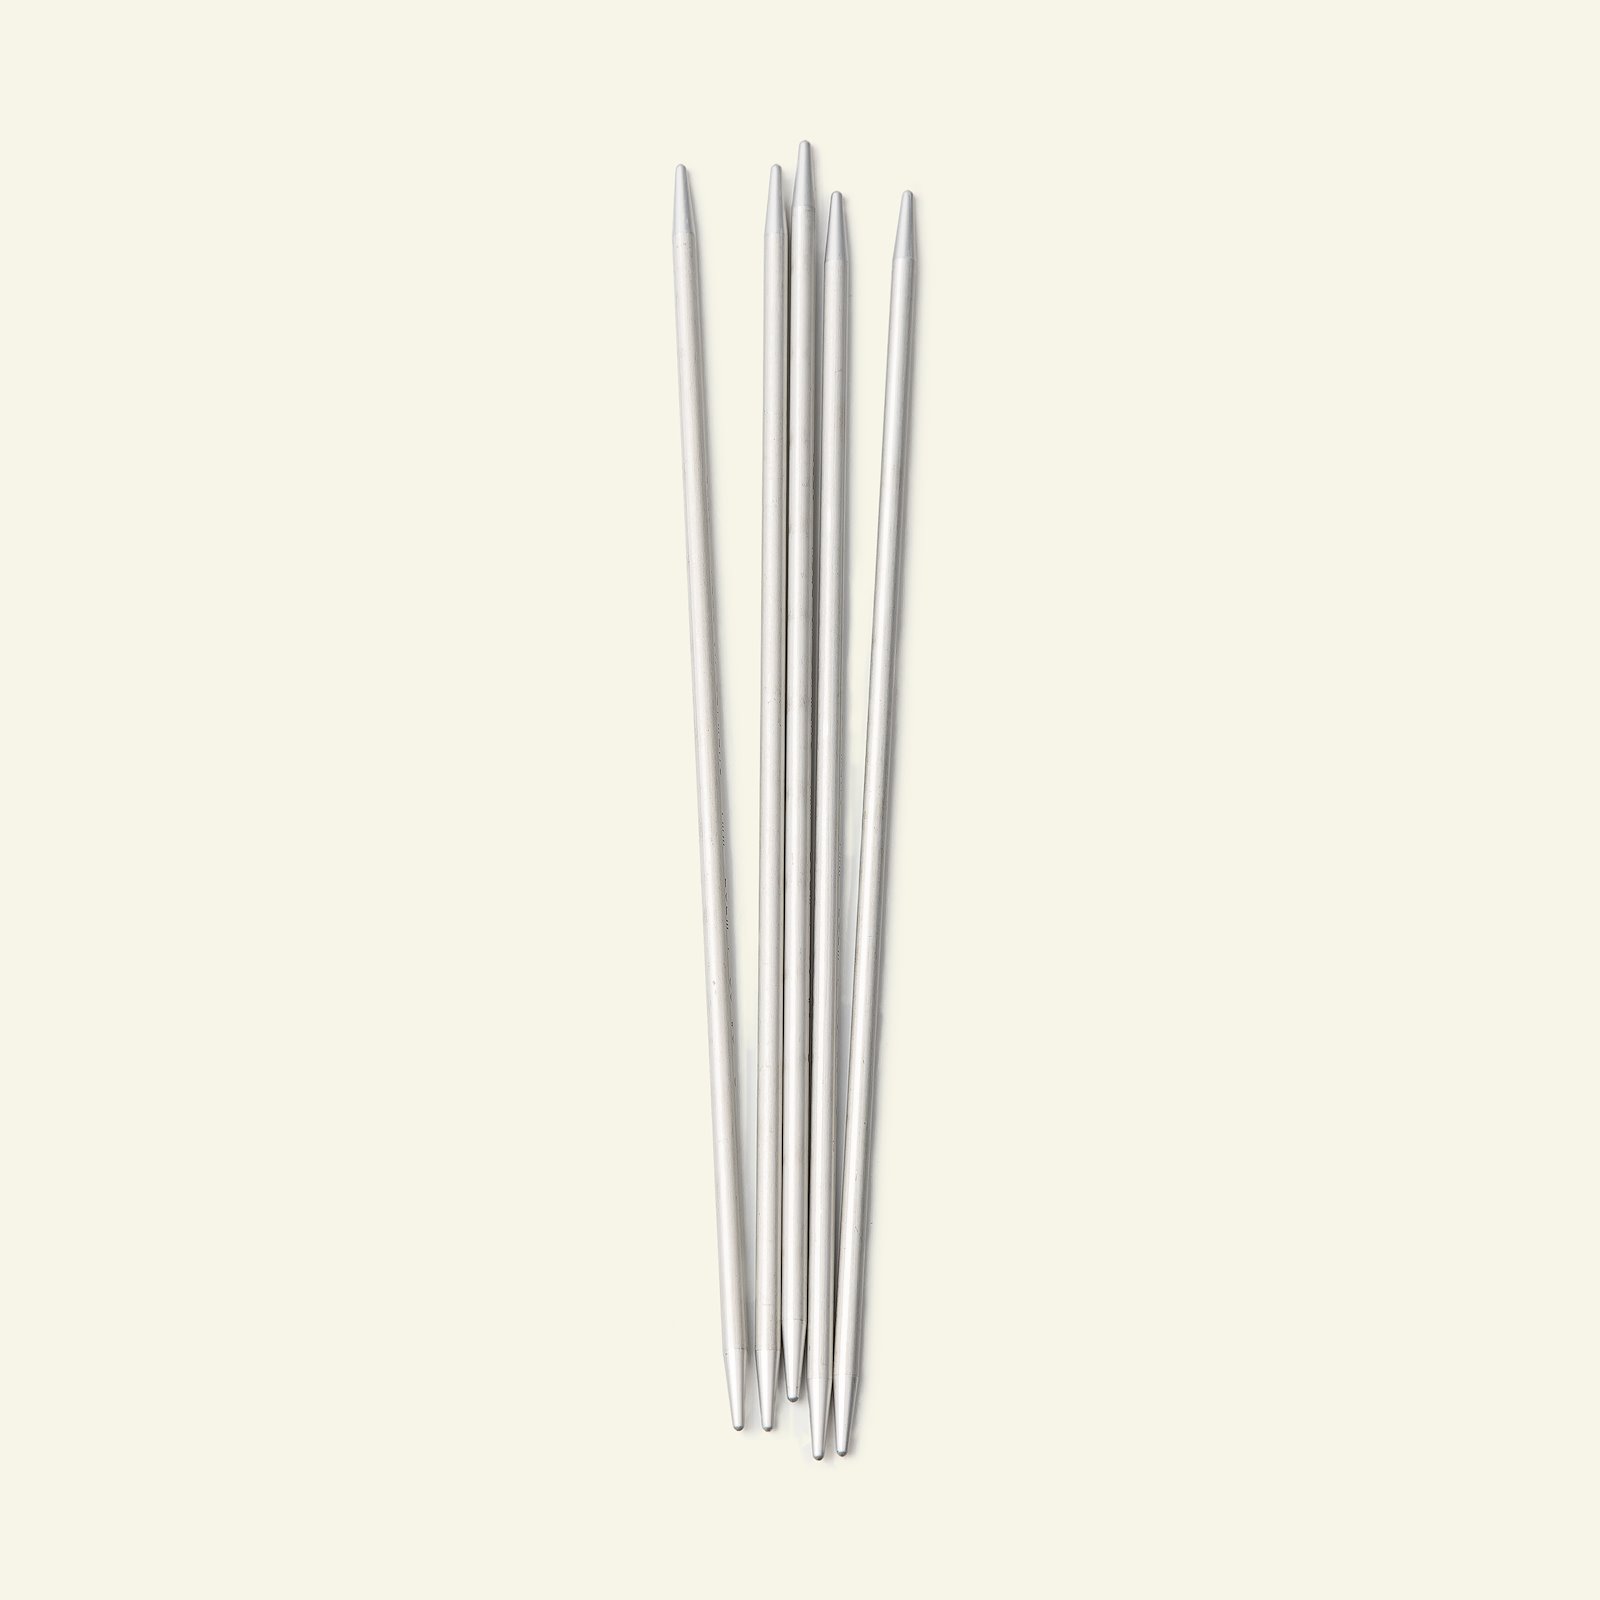 Addi double pointed needle 20cm 2mm 83047_pack